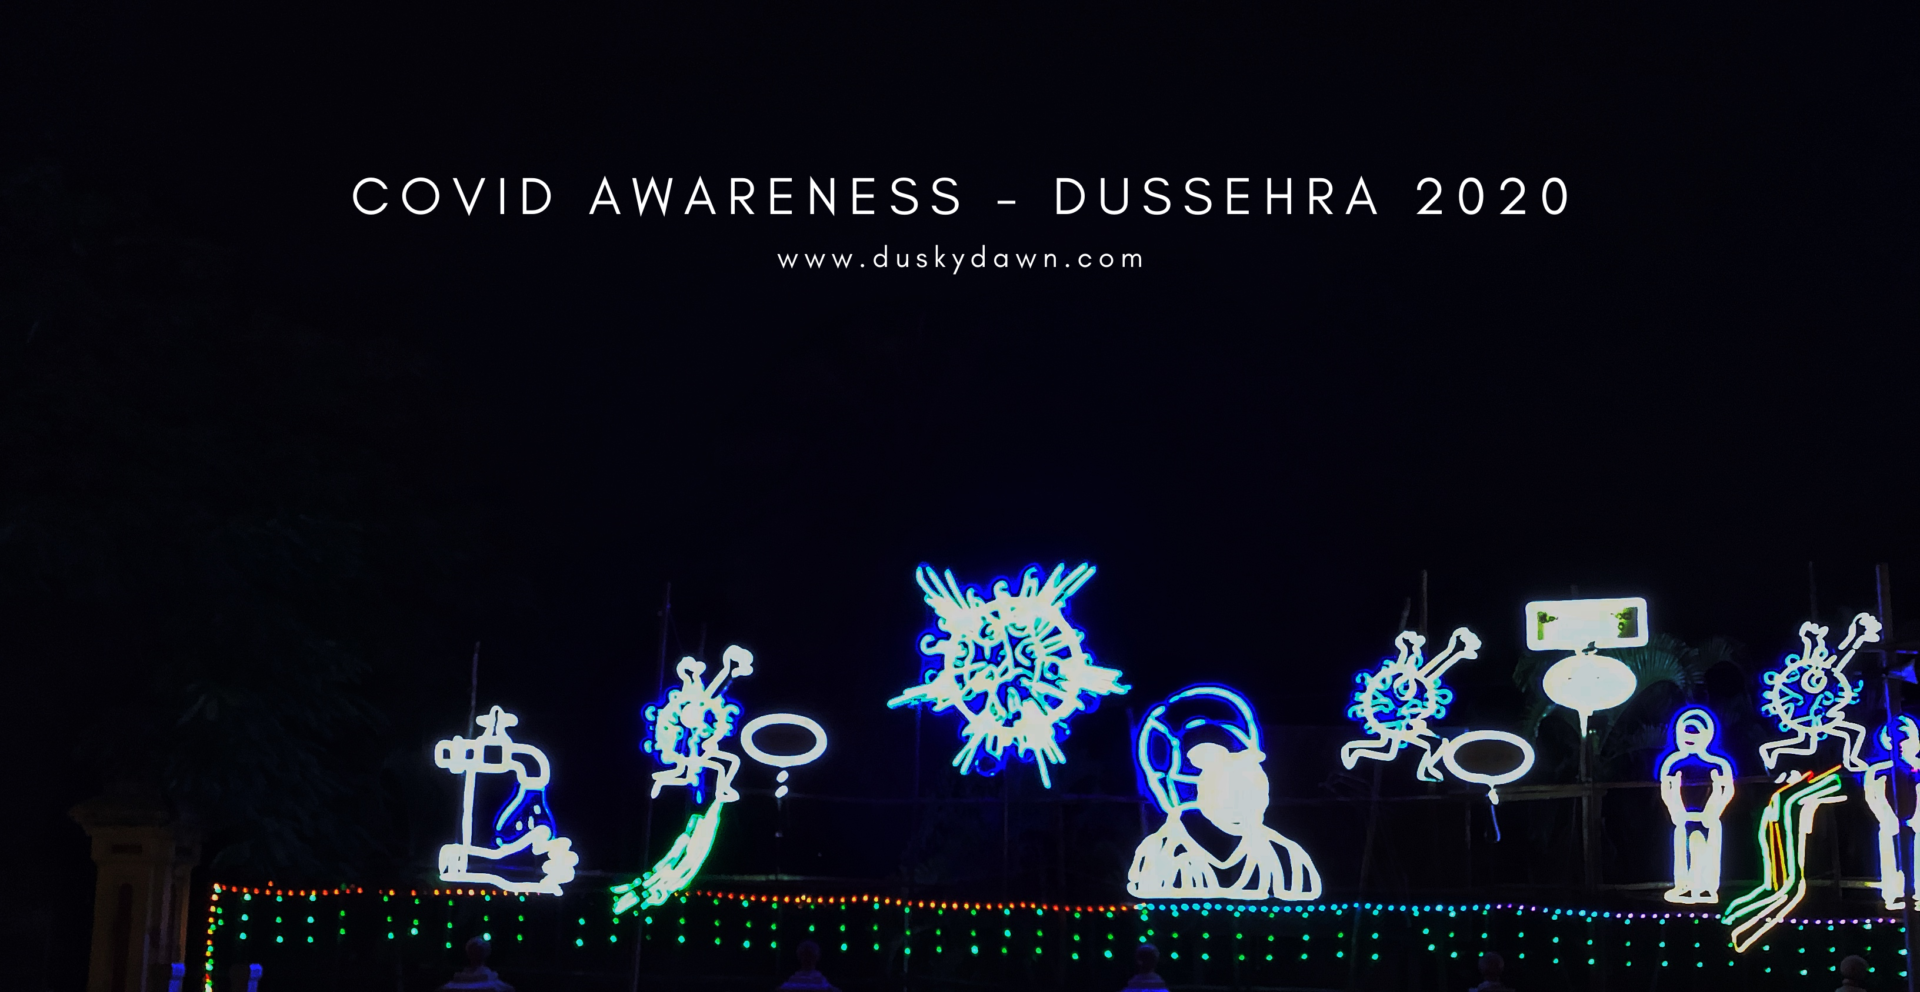 Covid Awareness during Dussehra 2020